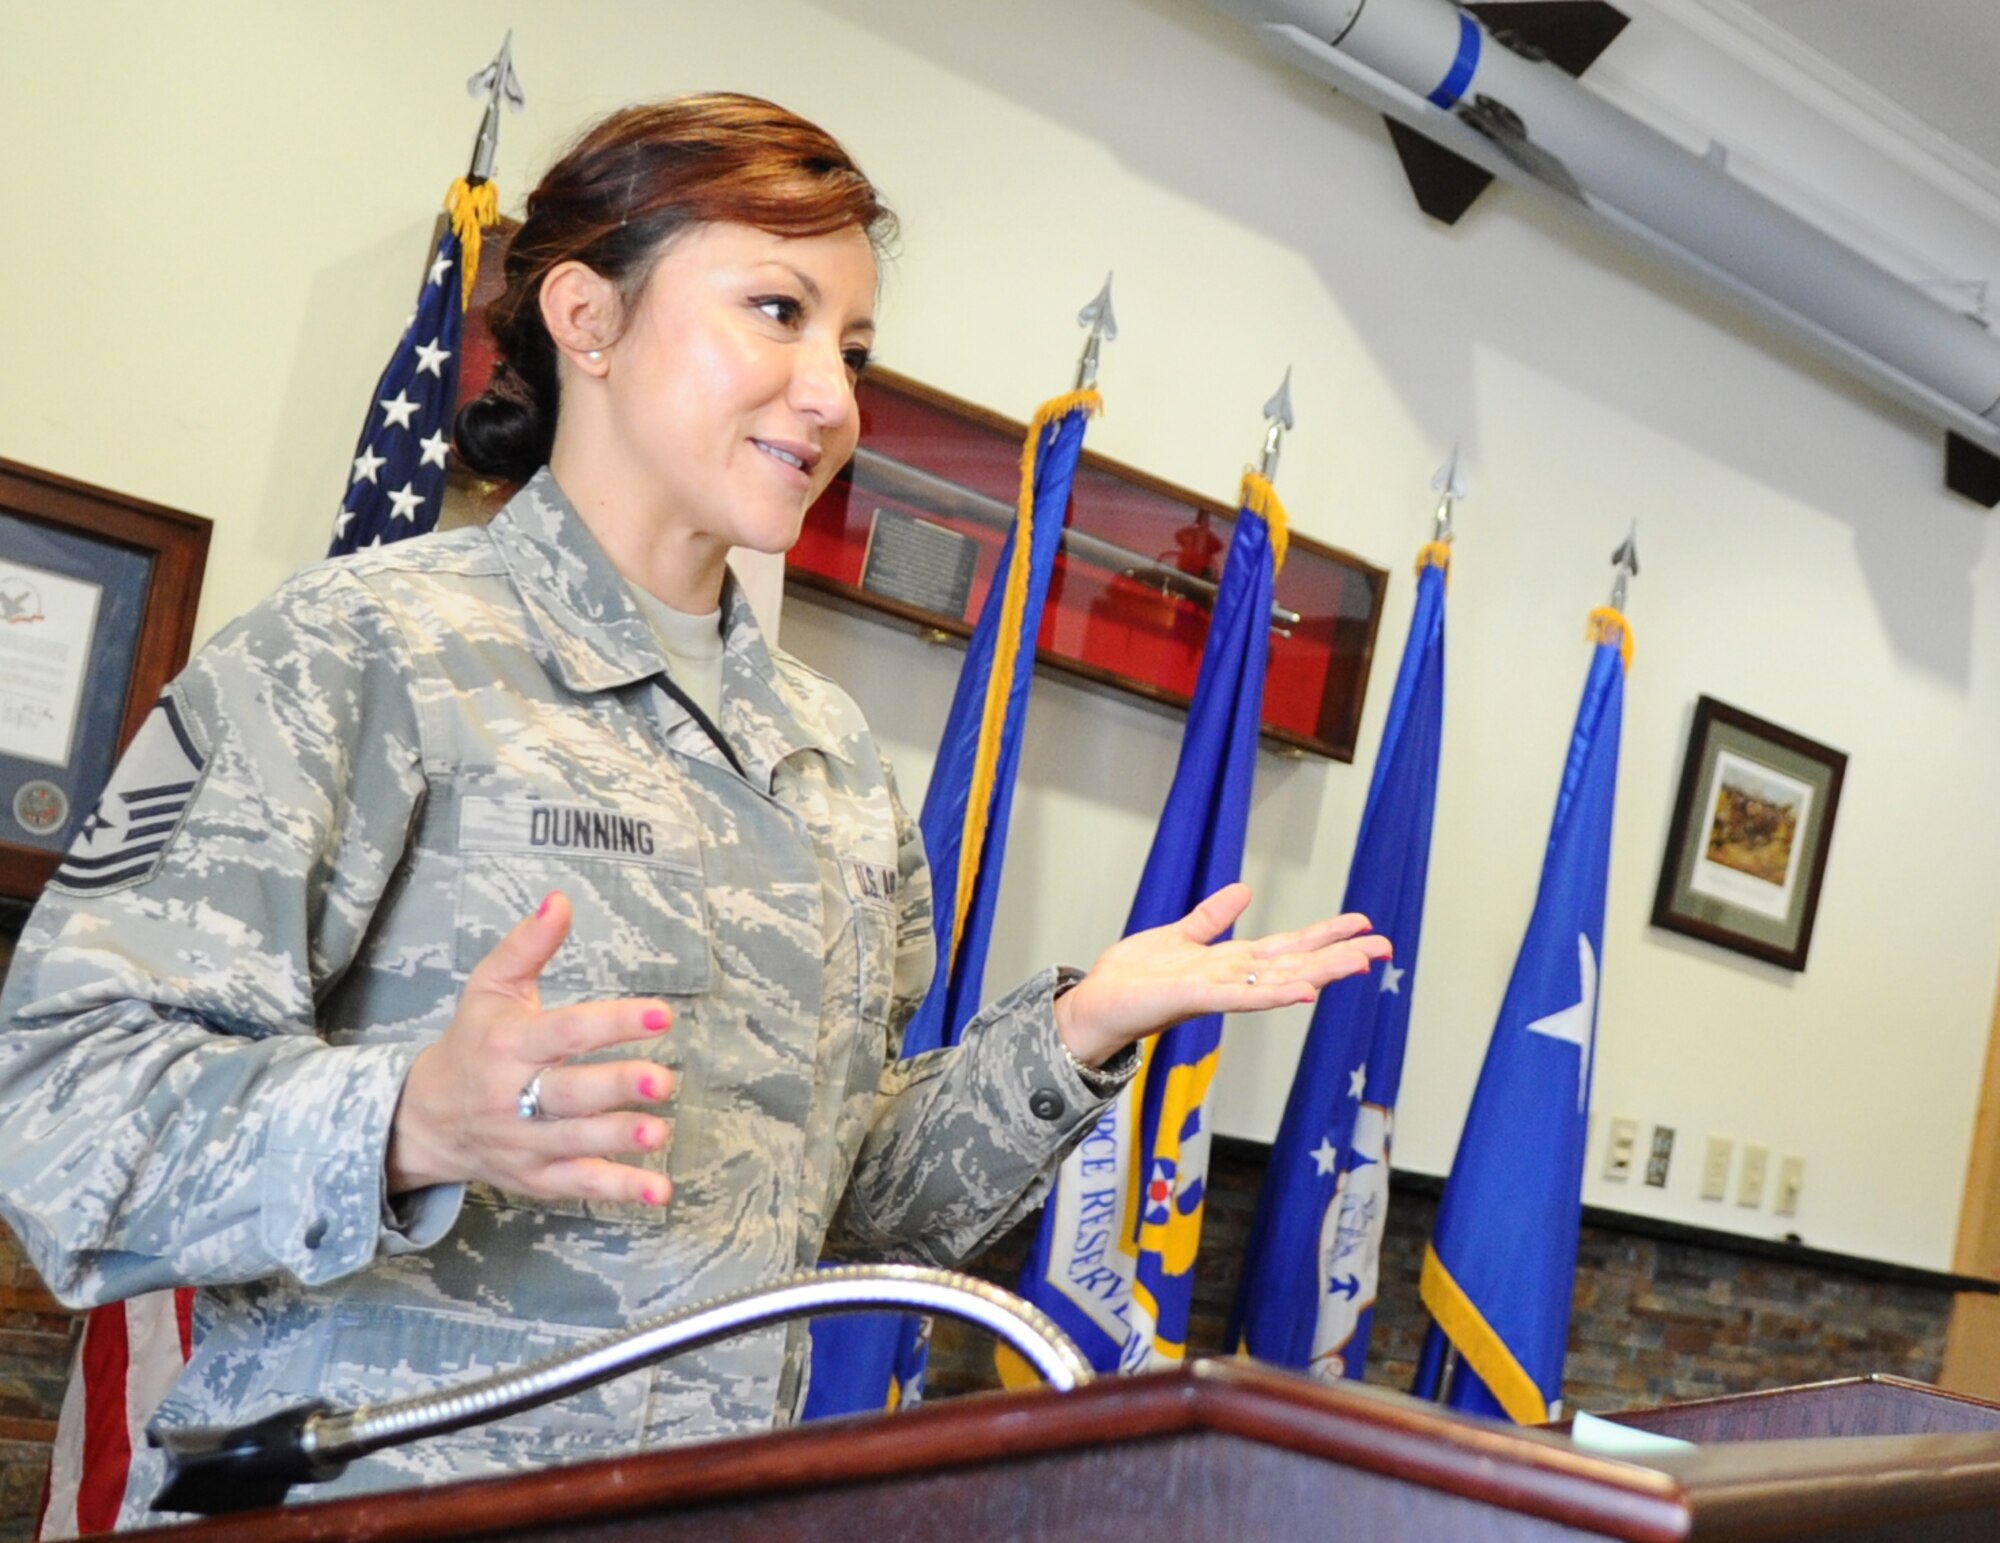 Master Sgt. Martha Dunning, AFNORTH standards and evaluations manager, briefs AFNORTH members April 4 at the Killey Center for Homeland Operations. Dunning is the units Combined Enlisted Association president. She has served as the manager of the 601st Air Operations Center Color Guard Team and as a member of the Tyndall Honor Guard Team.